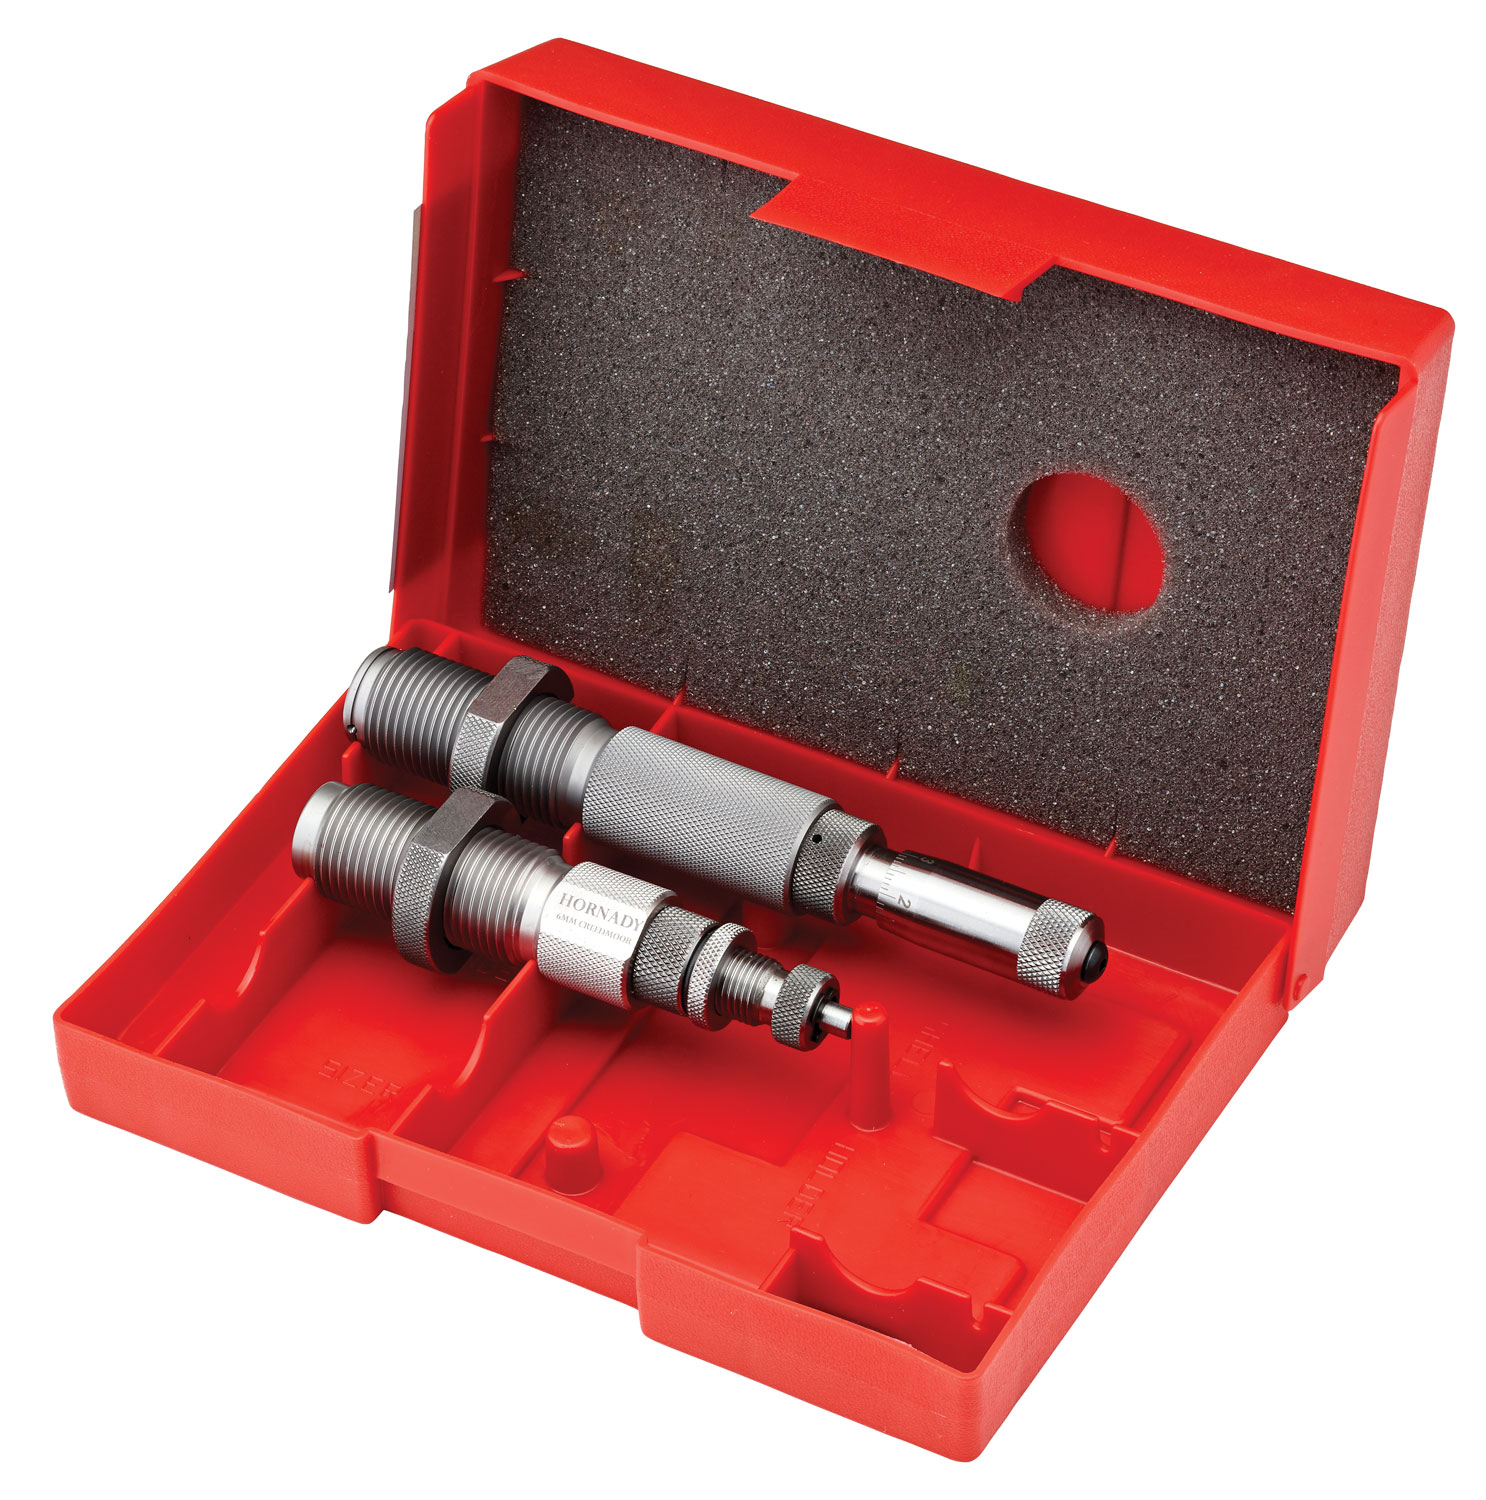 Hornady 544207 Match Grade 2 Die Set for 223 Rem Includes Bushing/Seater